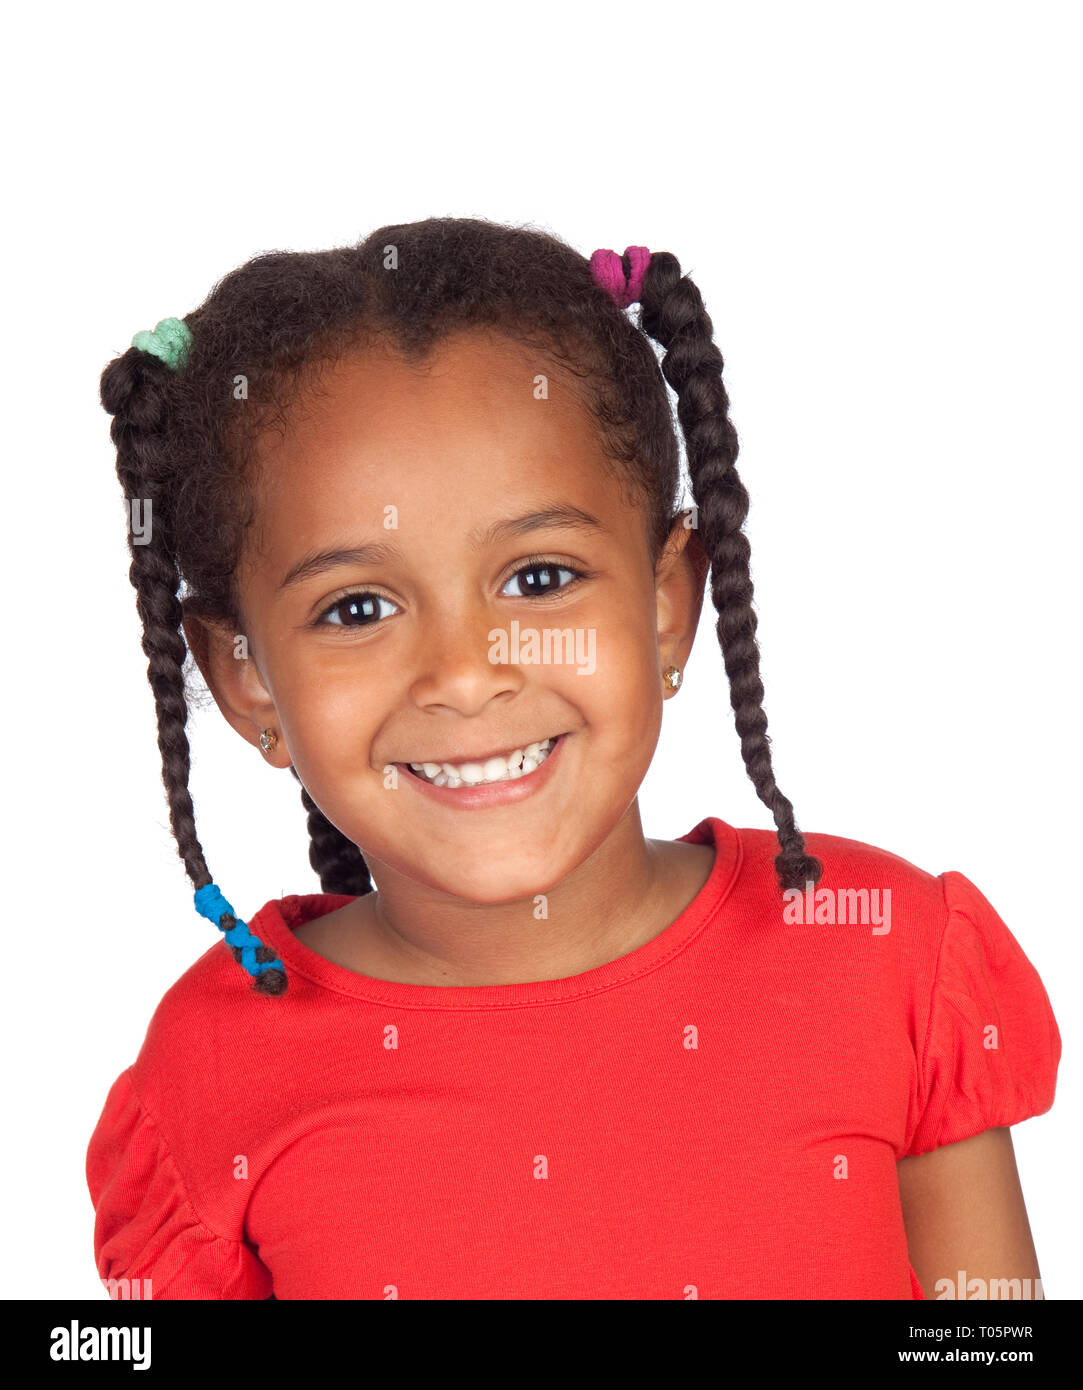 Happy african child with braids and red tshirt isolated on a white background Stock Photo